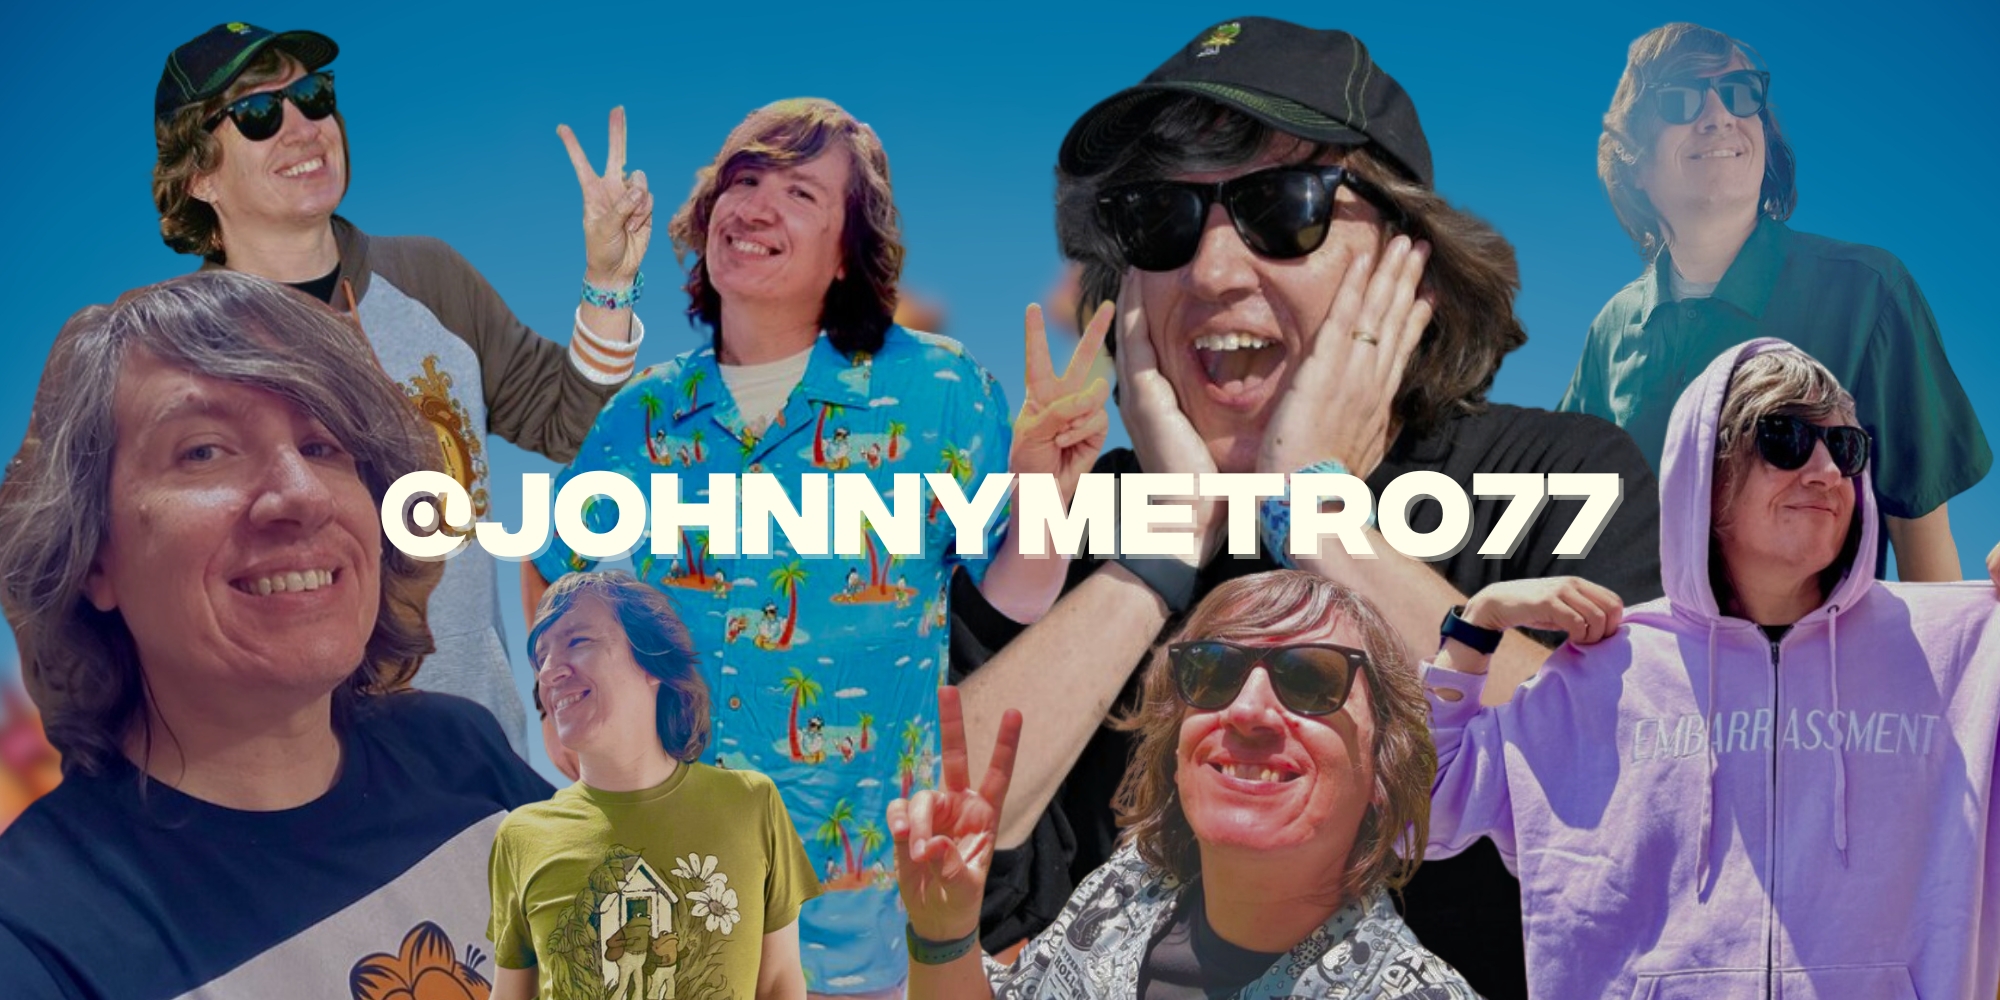 Influencer Sessions: Get To Know @johnnymetro77